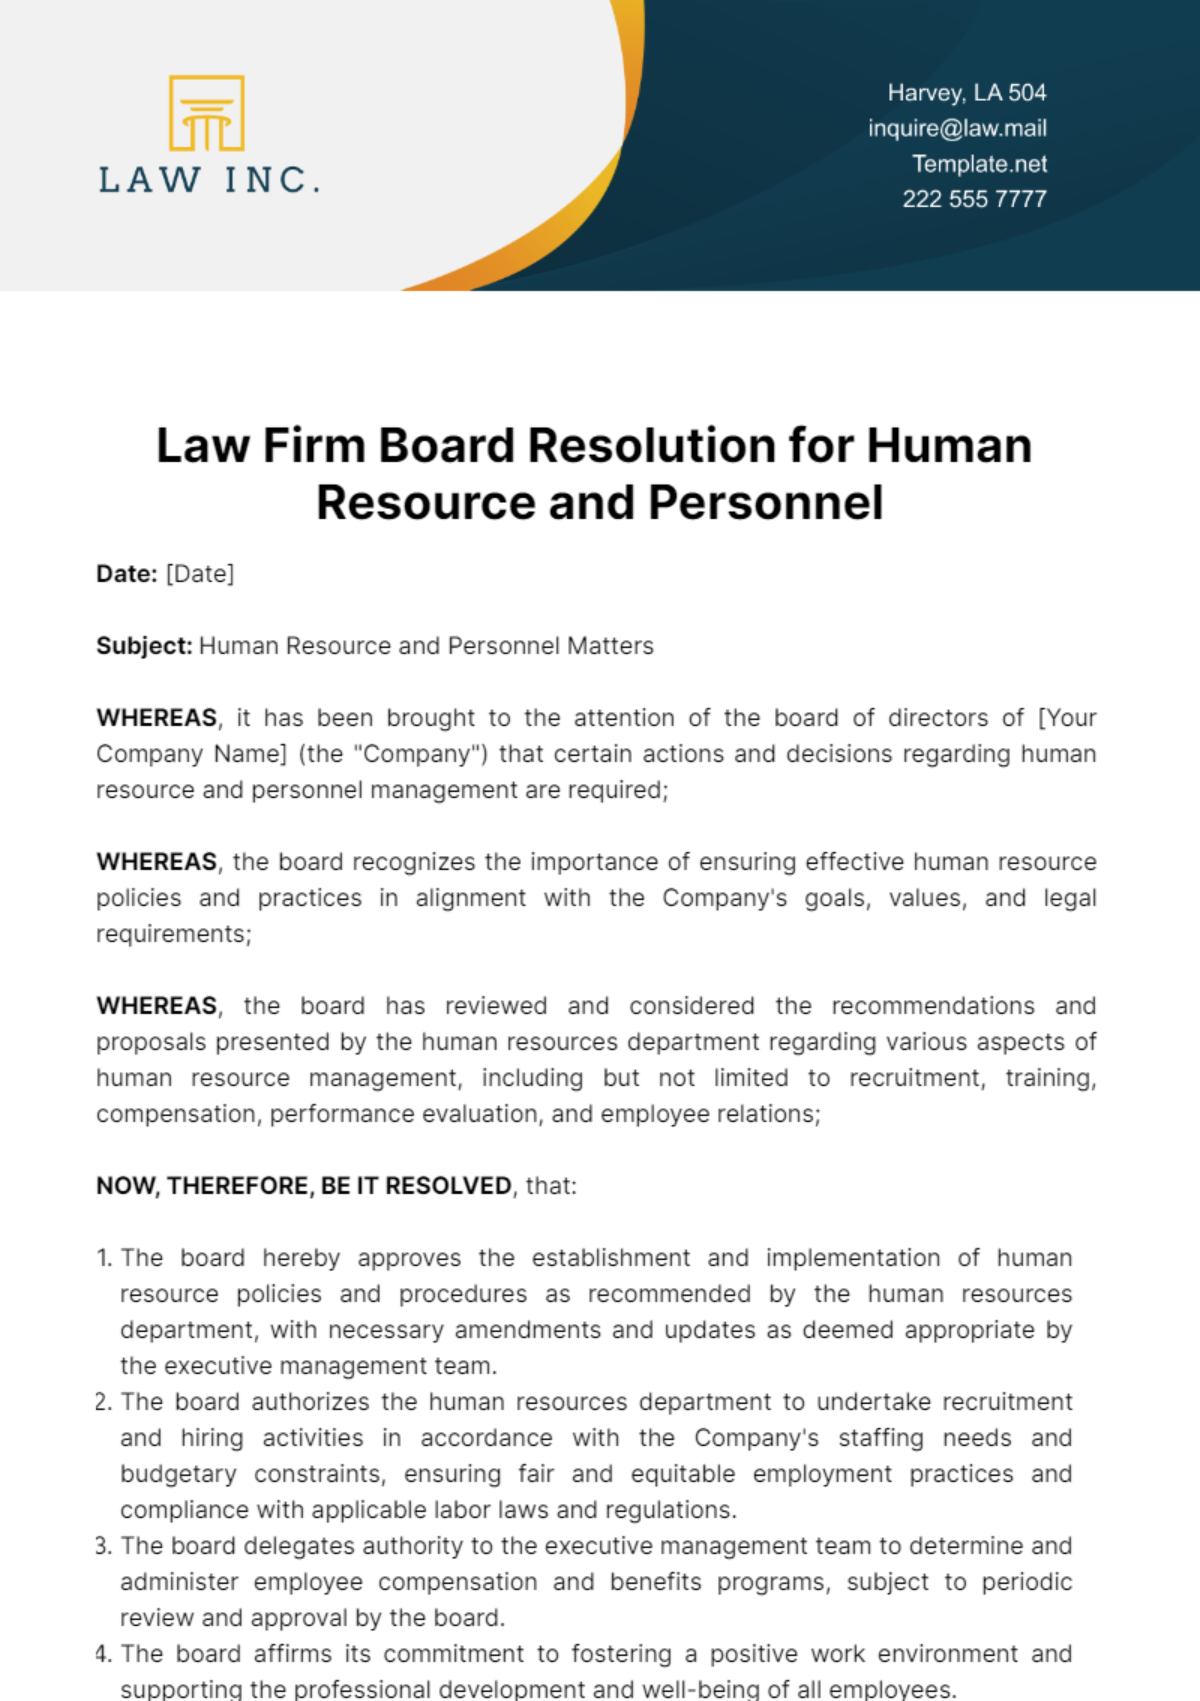 Free Law Firm Board Resolution for Human Resource and Personnel Template